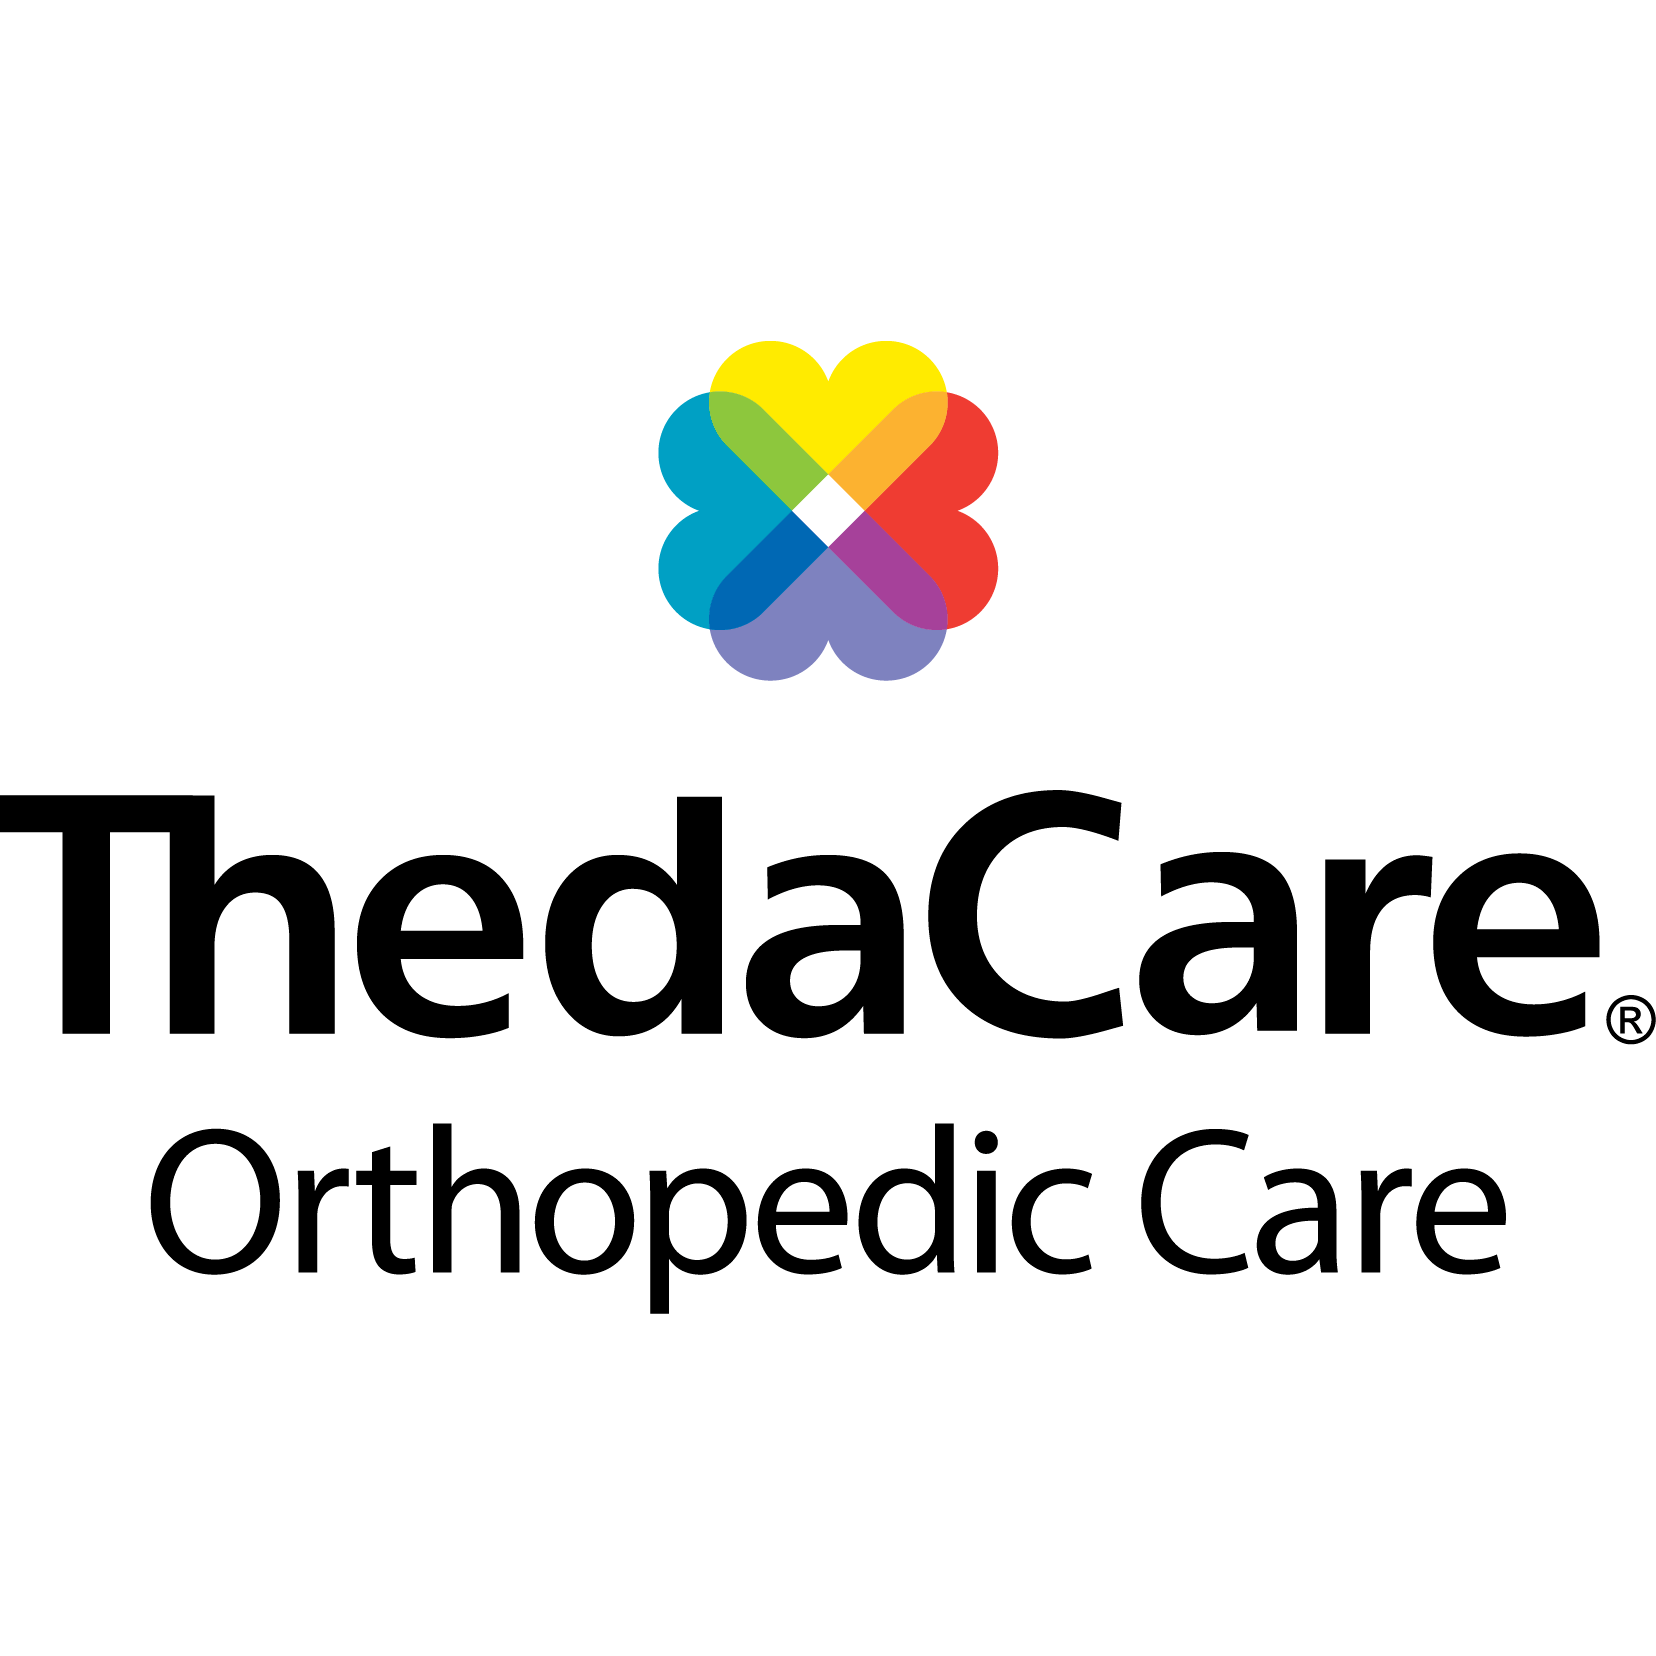 ThedaCare Pharmacy-Orthopedic-Spine and Pain